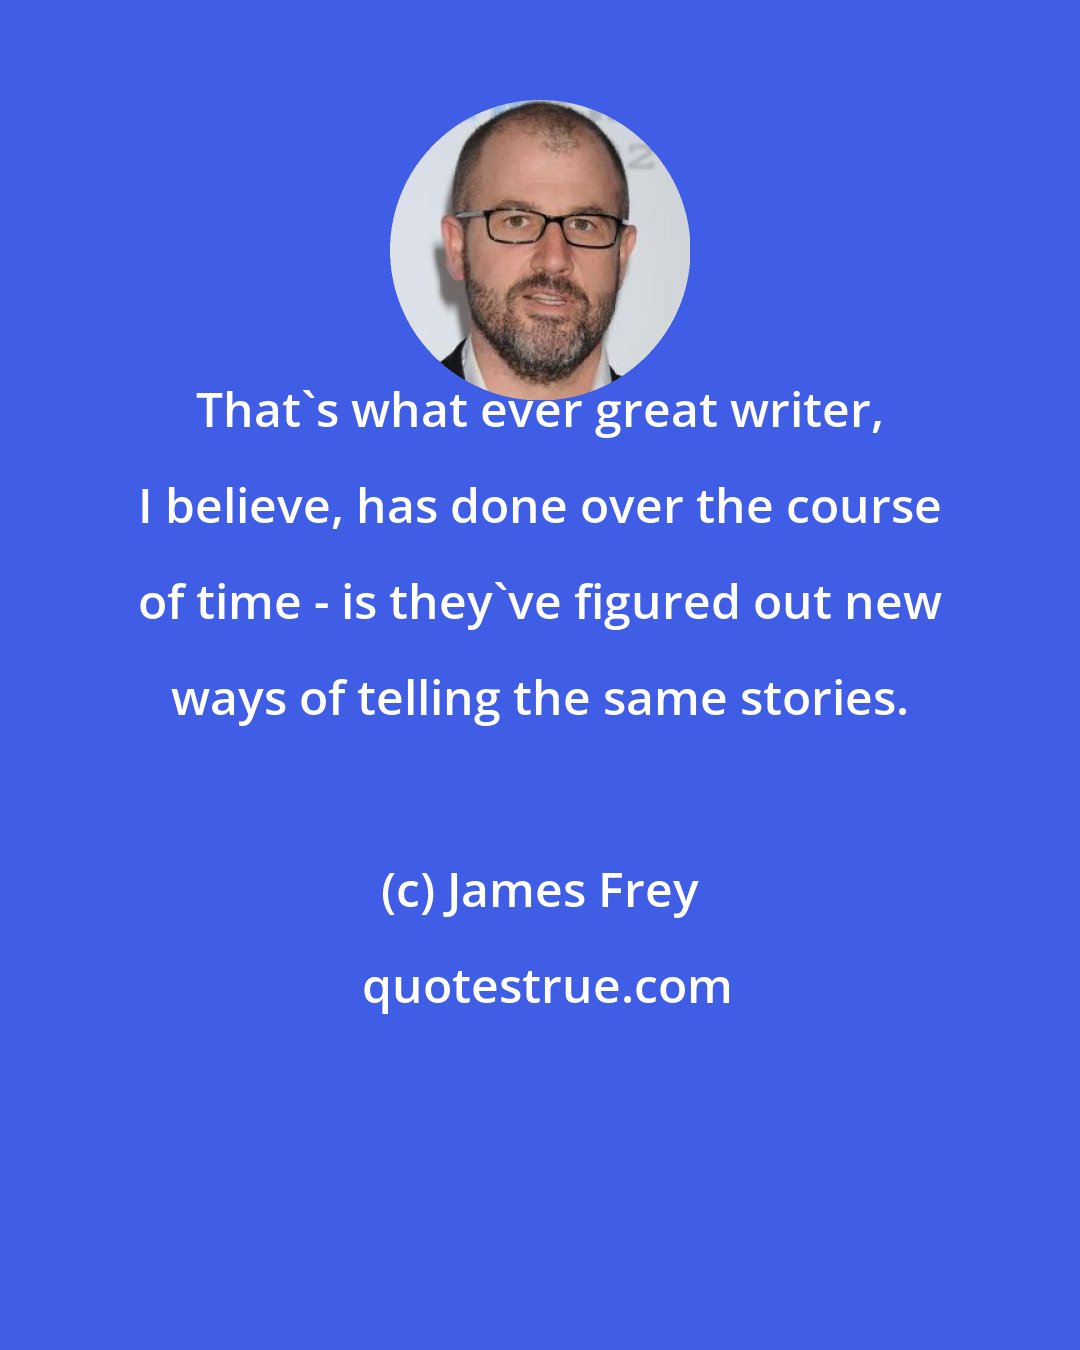 James Frey: That's what ever great writer, I believe, has done over the course of time - is they've figured out new ways of telling the same stories.